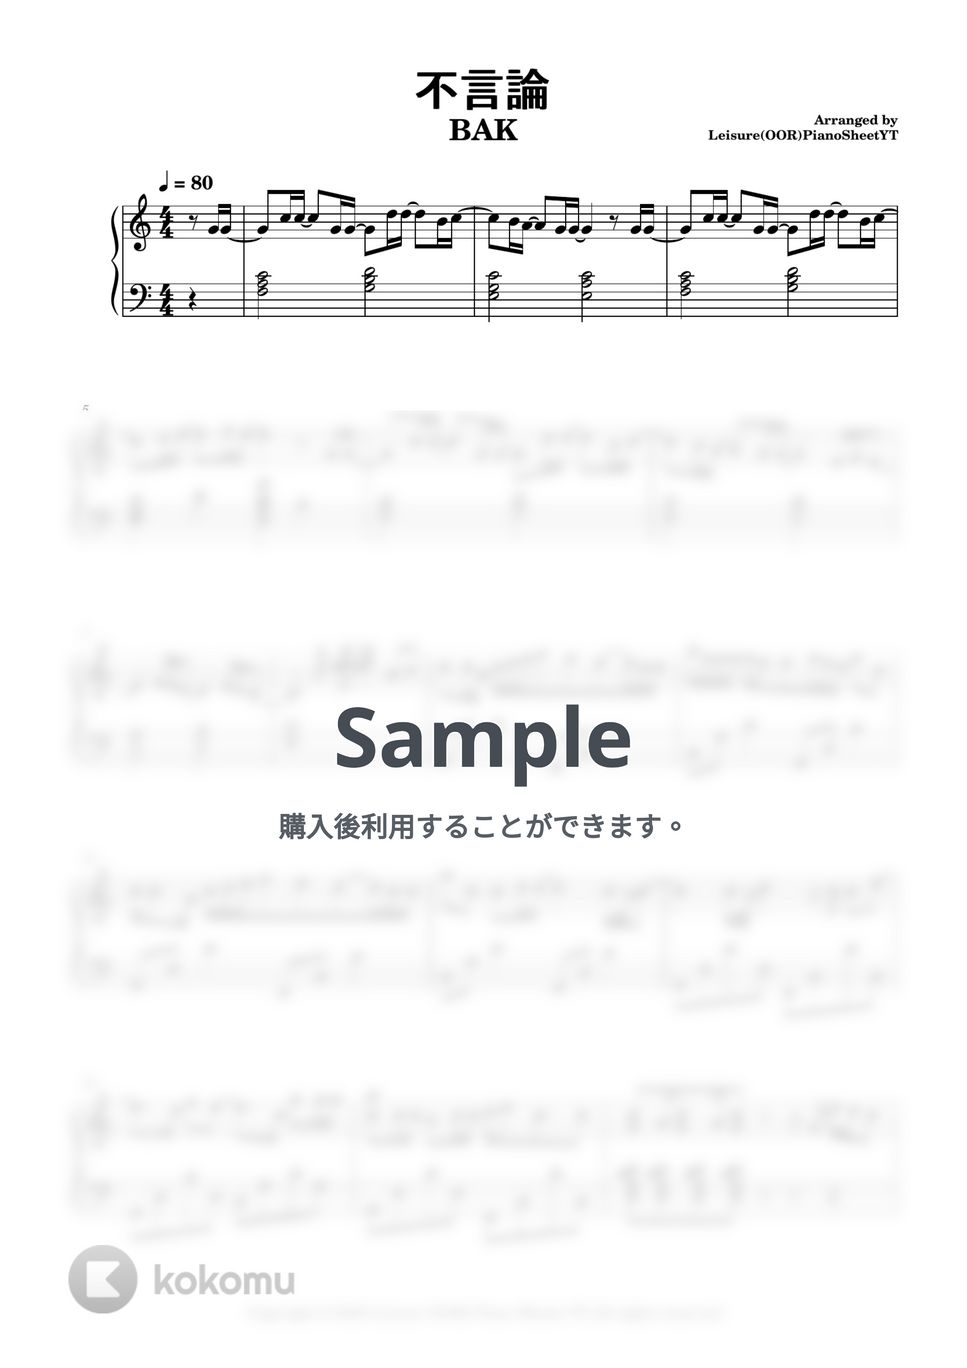 BAK - 不言論 by Leisure (OOR) Piano Sheets YT